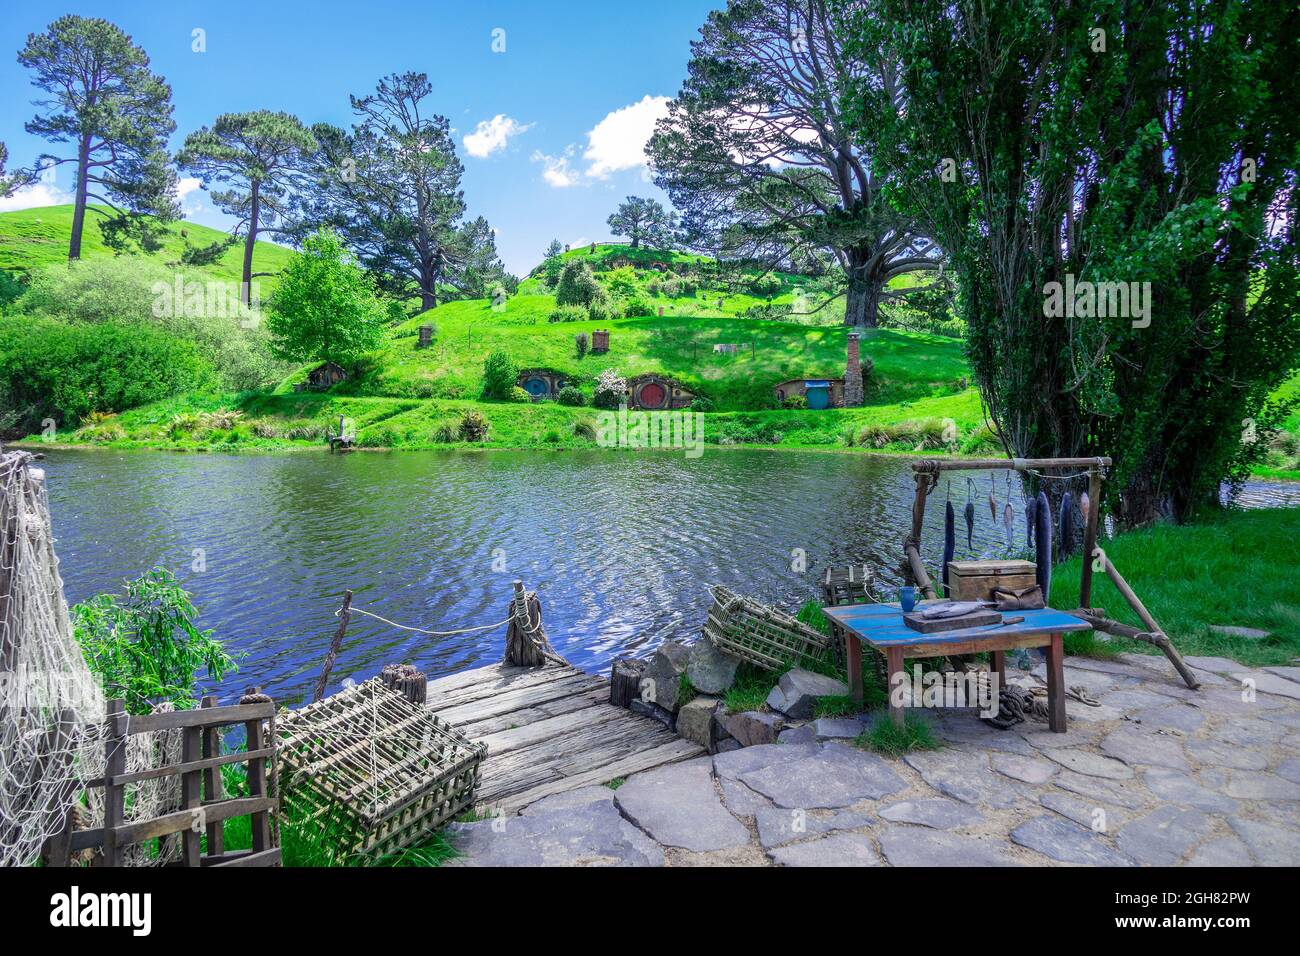 Hobbit on Movie Set In Matamata New Zealand, Hobbit Holes On The Hillside Overlooking The Lake In The Shire. Lord of The Rings. Stock Photo